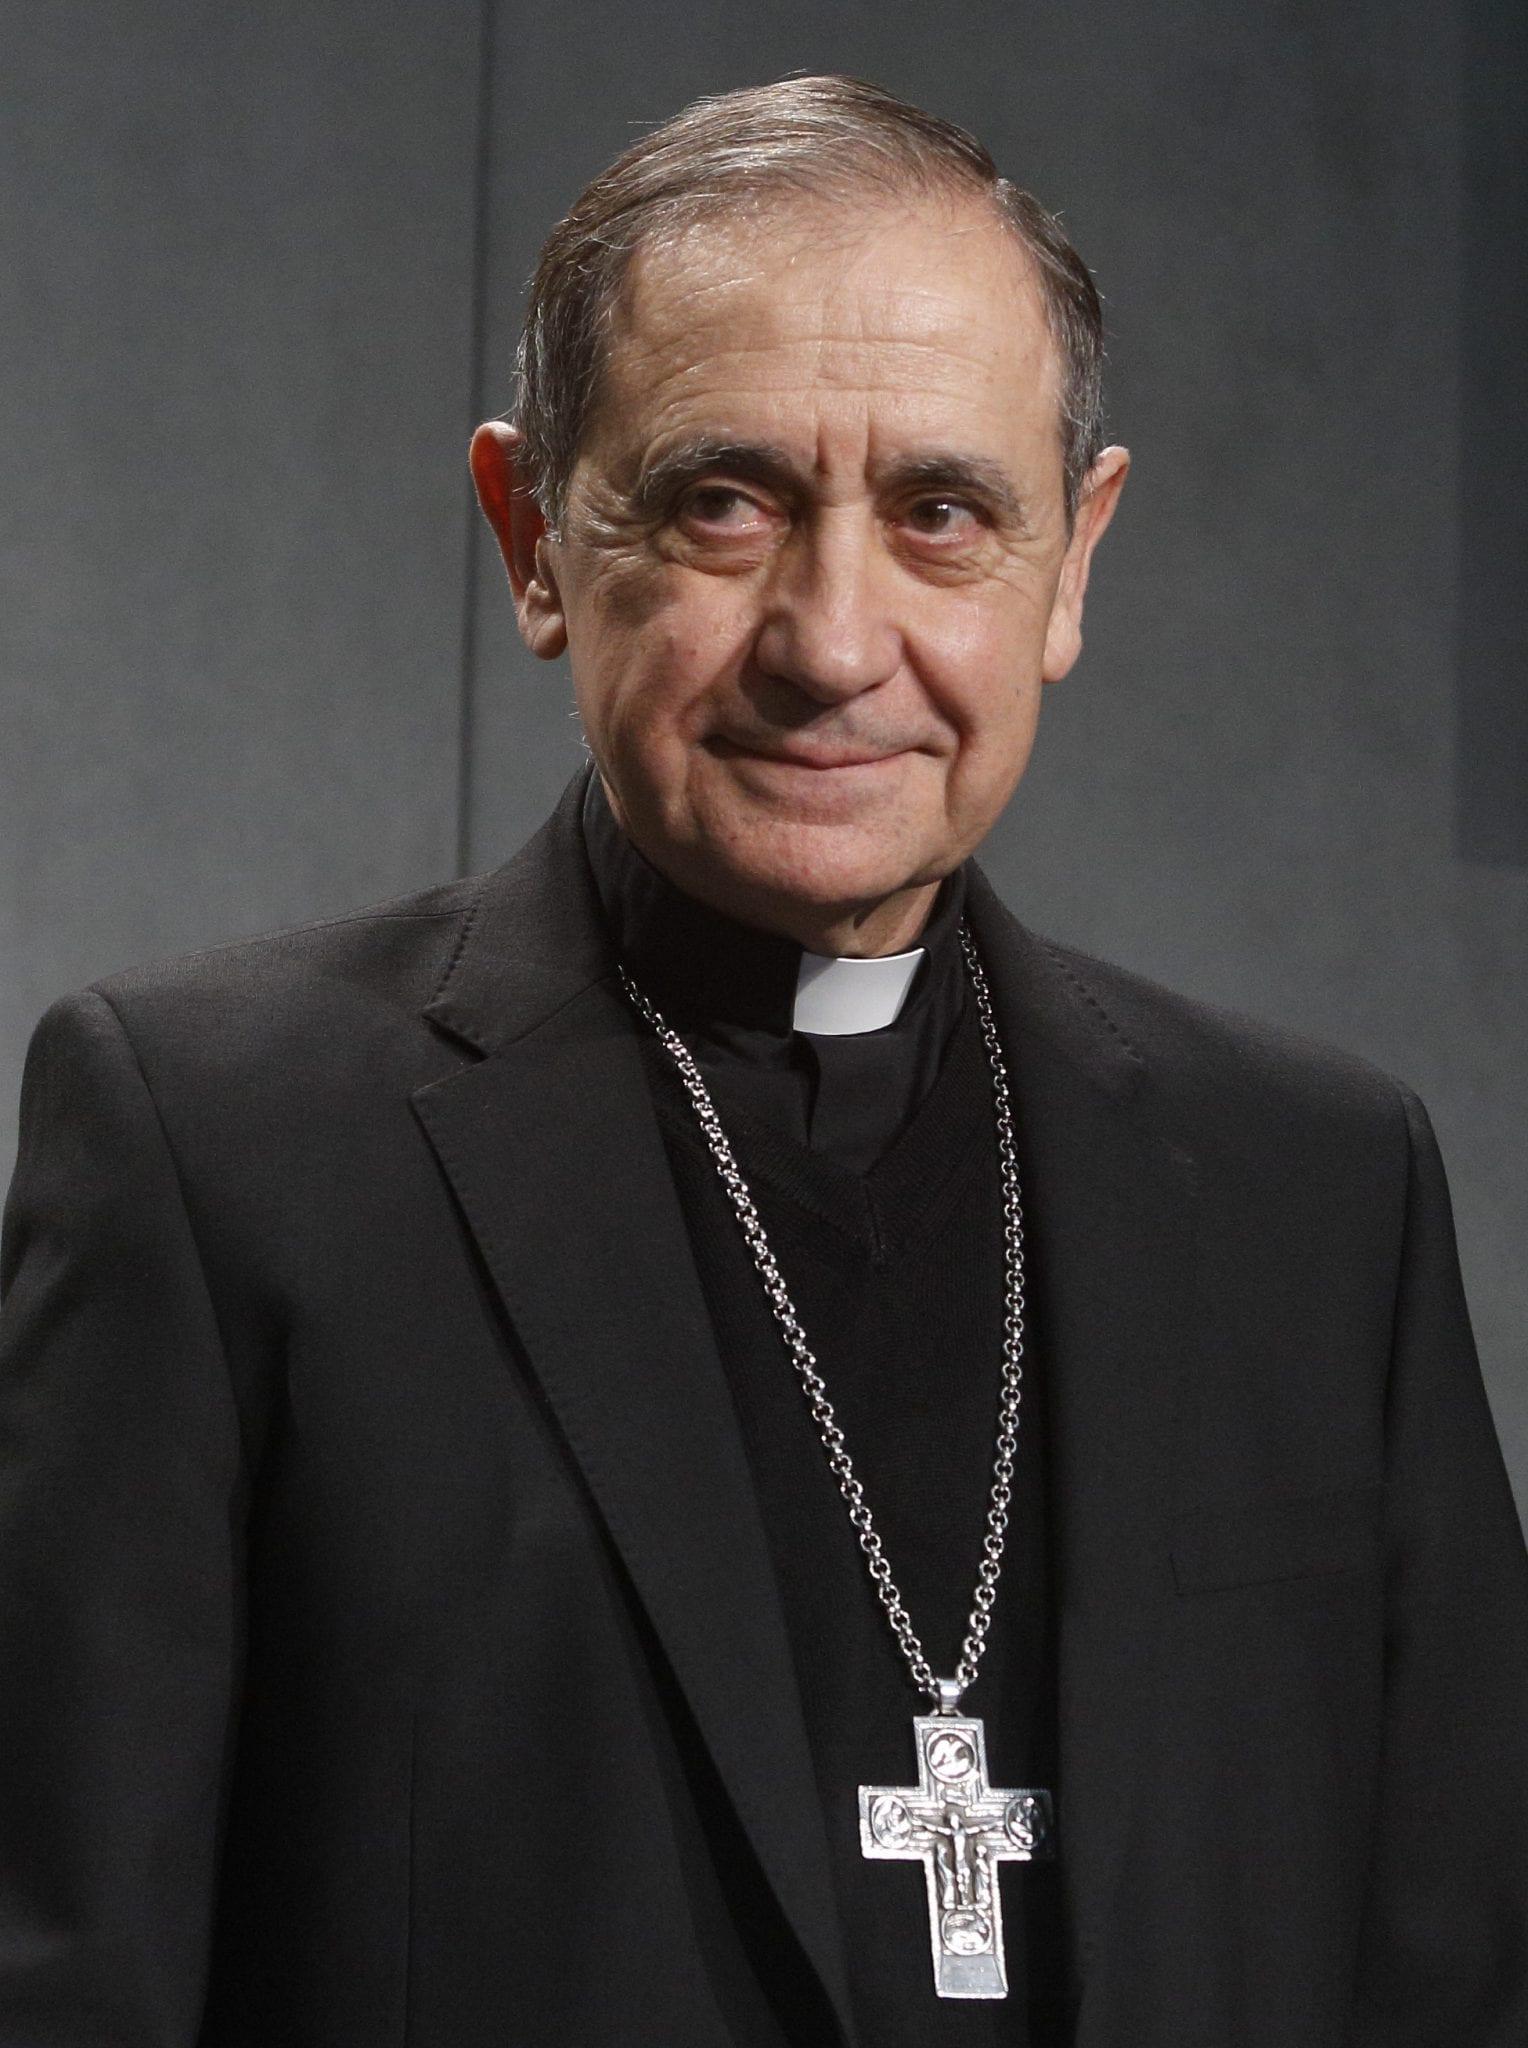 Official looks at meaning, role of ‘metropolitan archbishop’